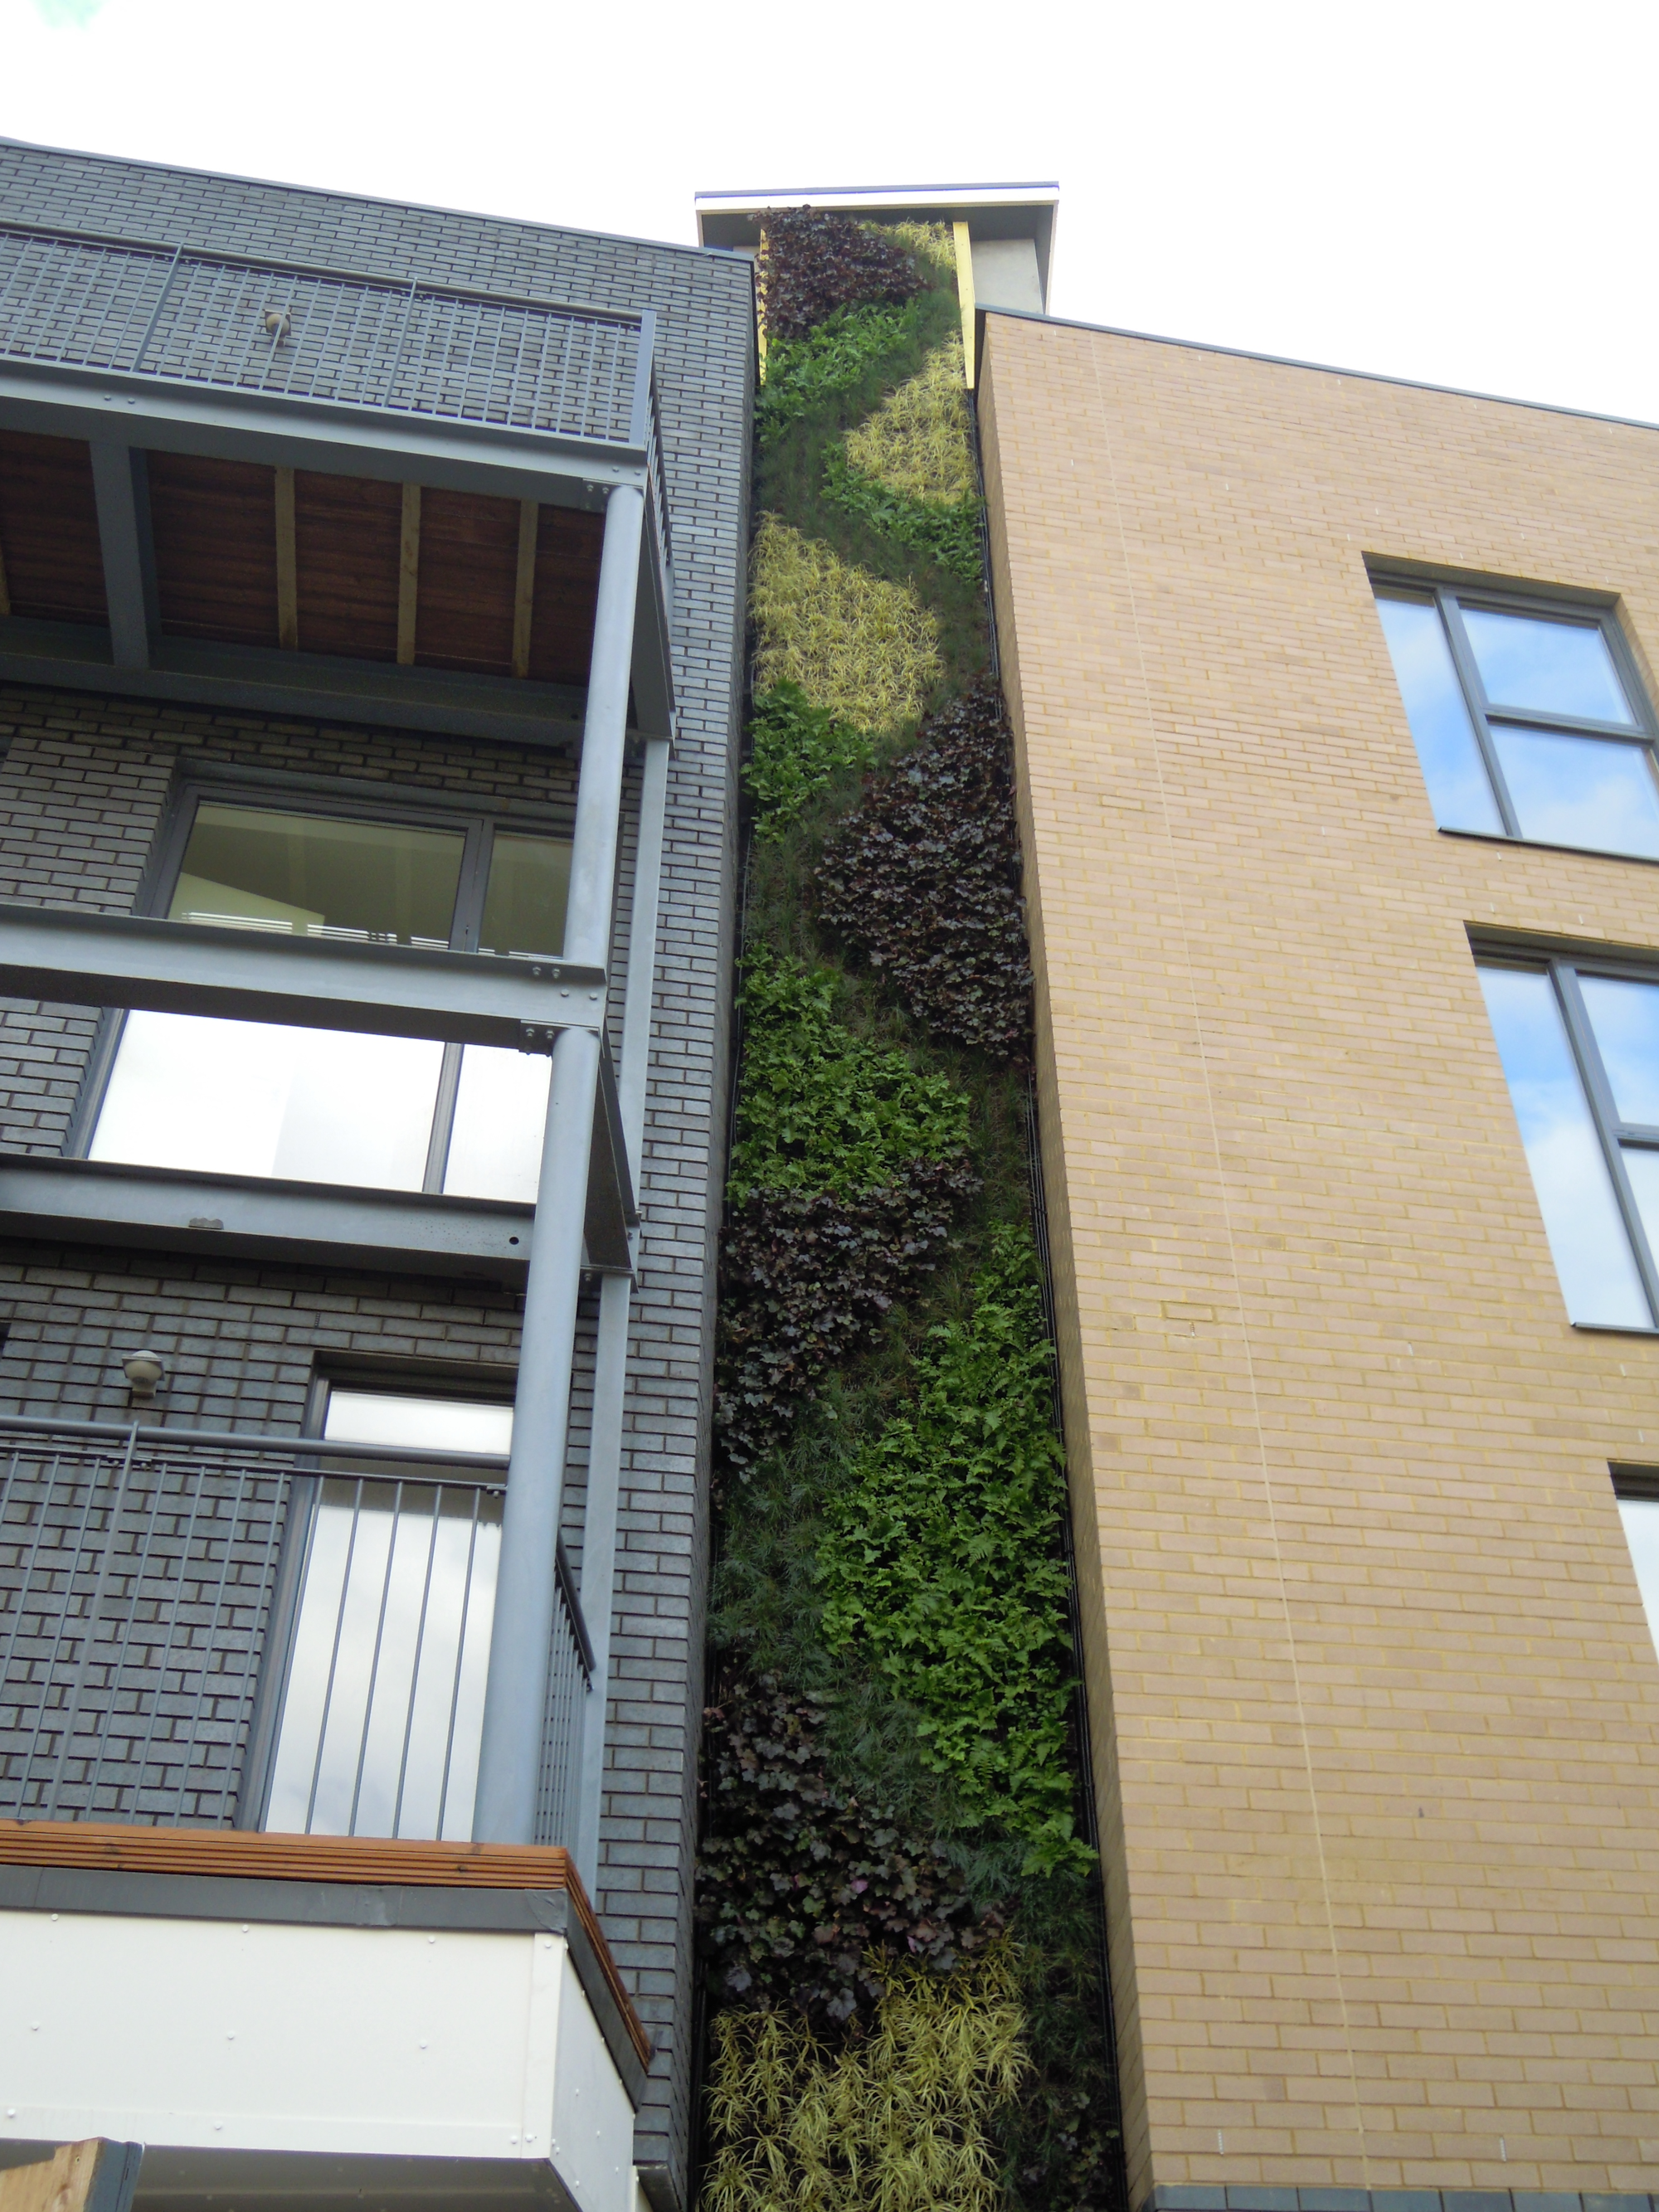 tall living wall next to balconies